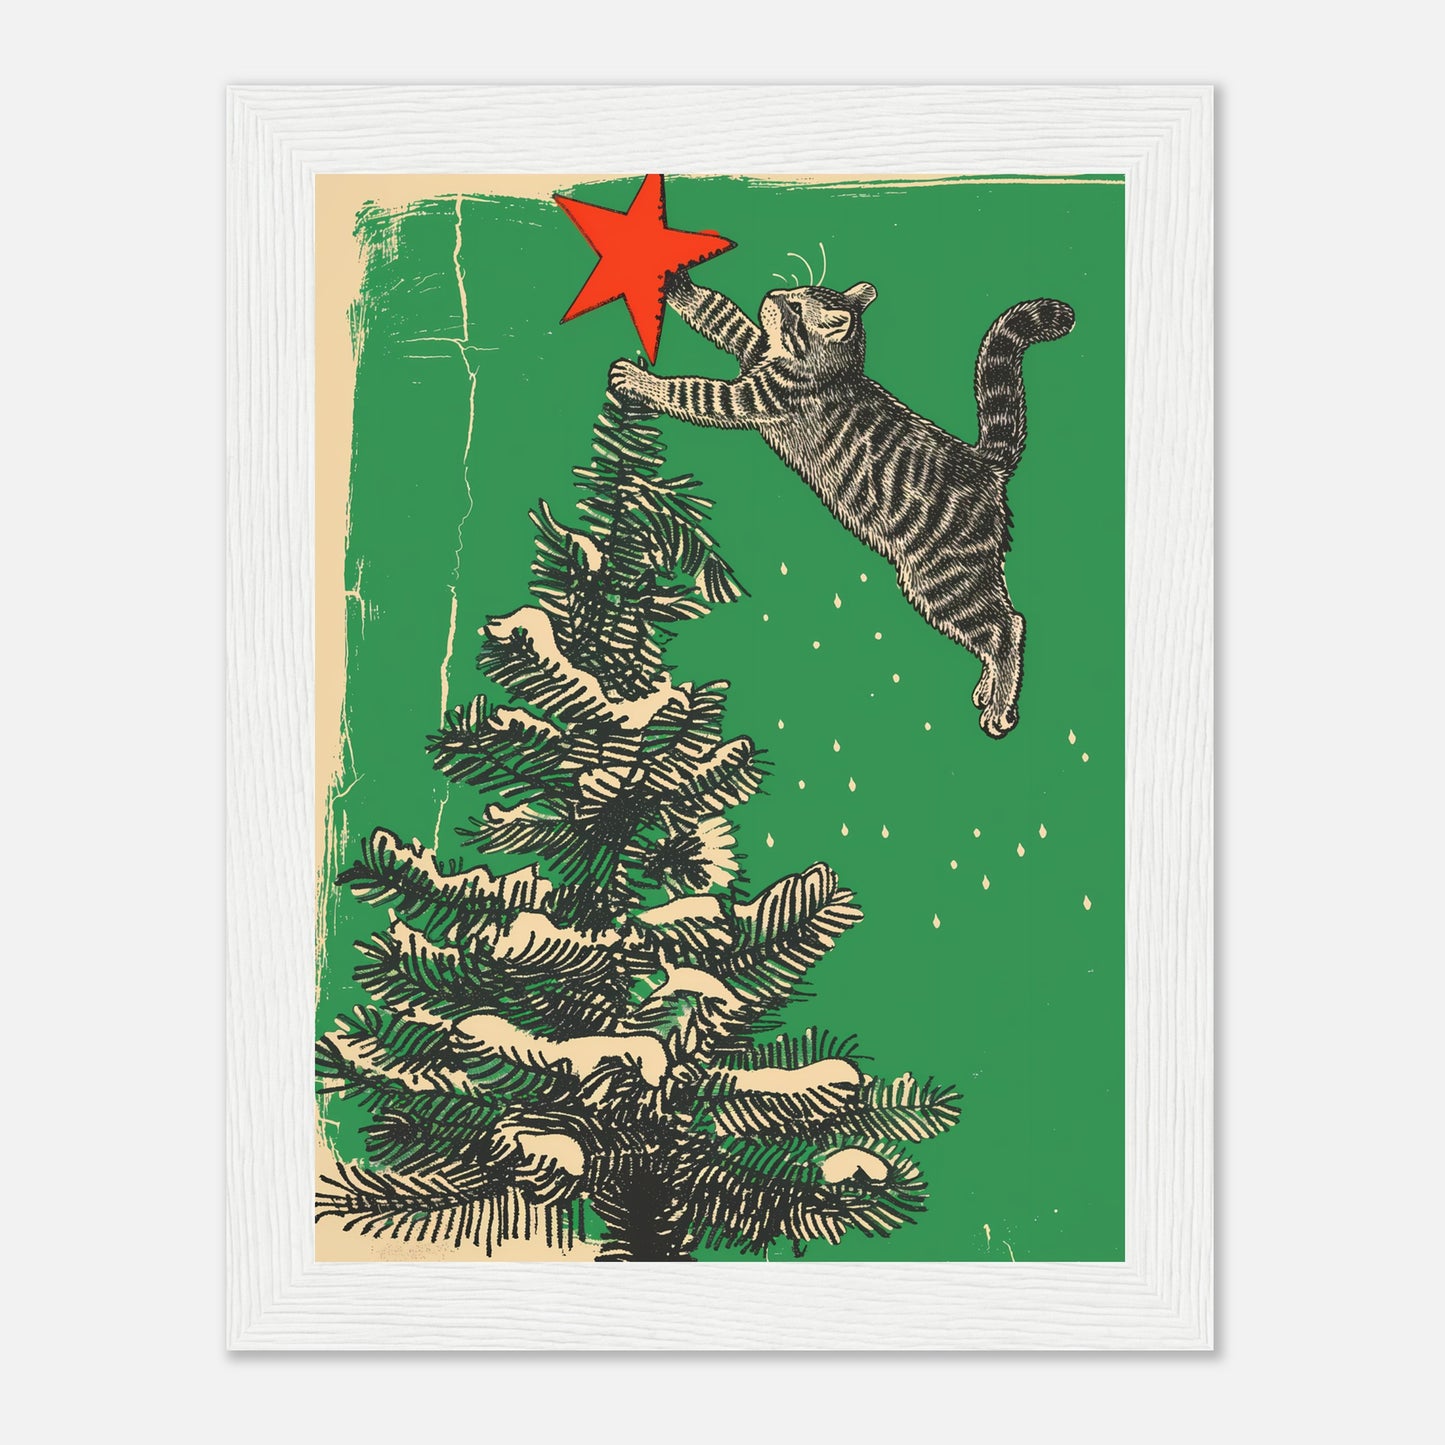 Illustration of a cat jumping towards a Christmas tree to reach a red star on top.